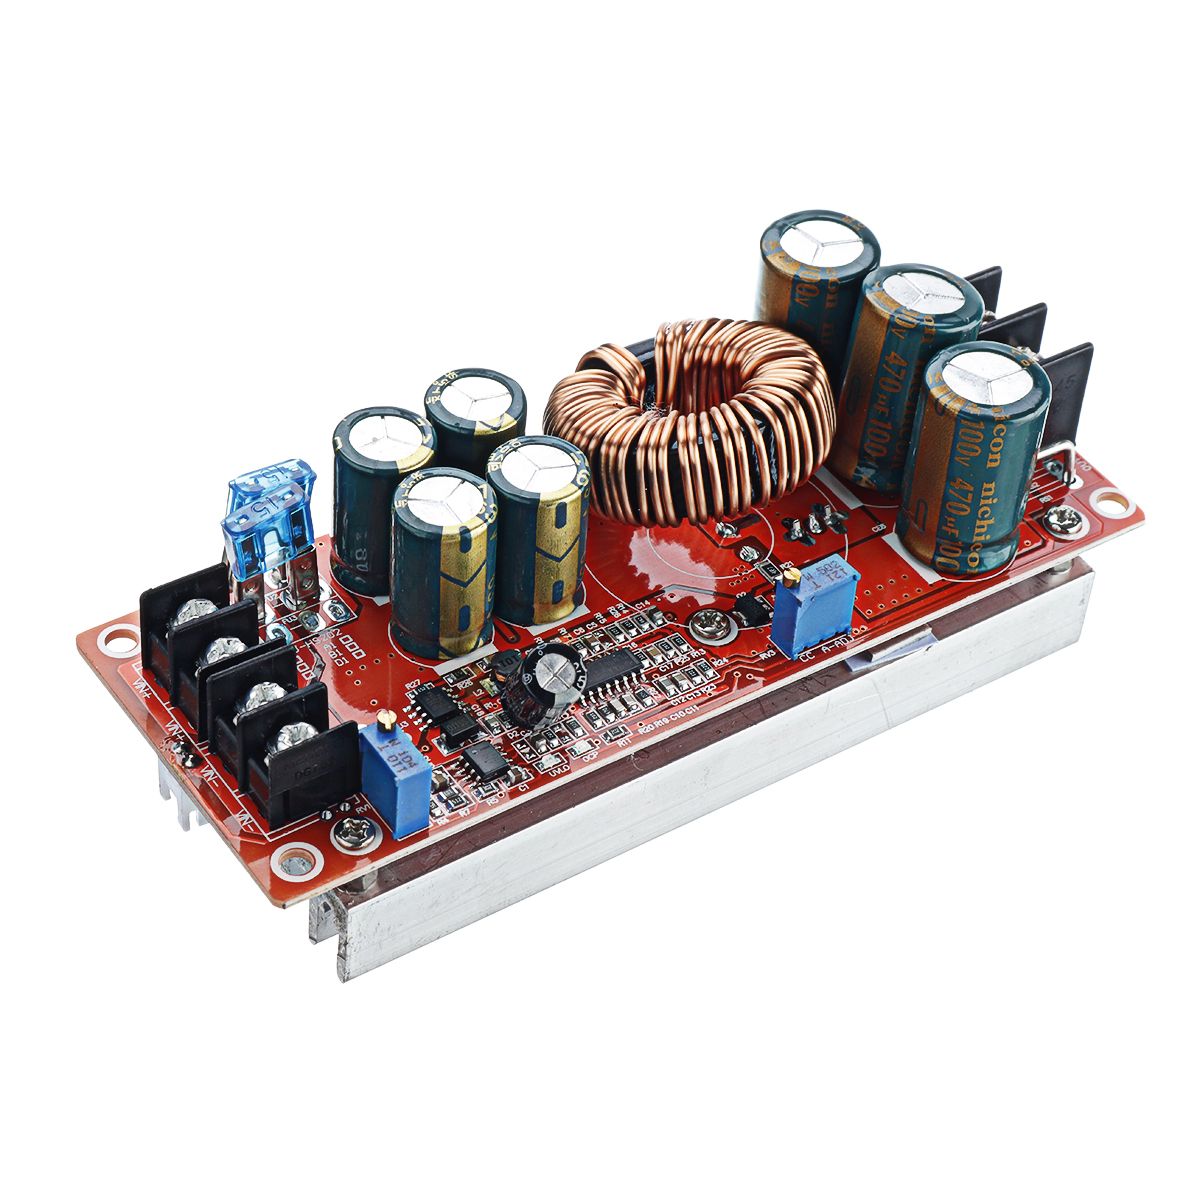 1200W-High-Power-DC-DC-Voltage-Boosting-Adjustable-Constant-Voltage-and-Current-Power-Module-1702644